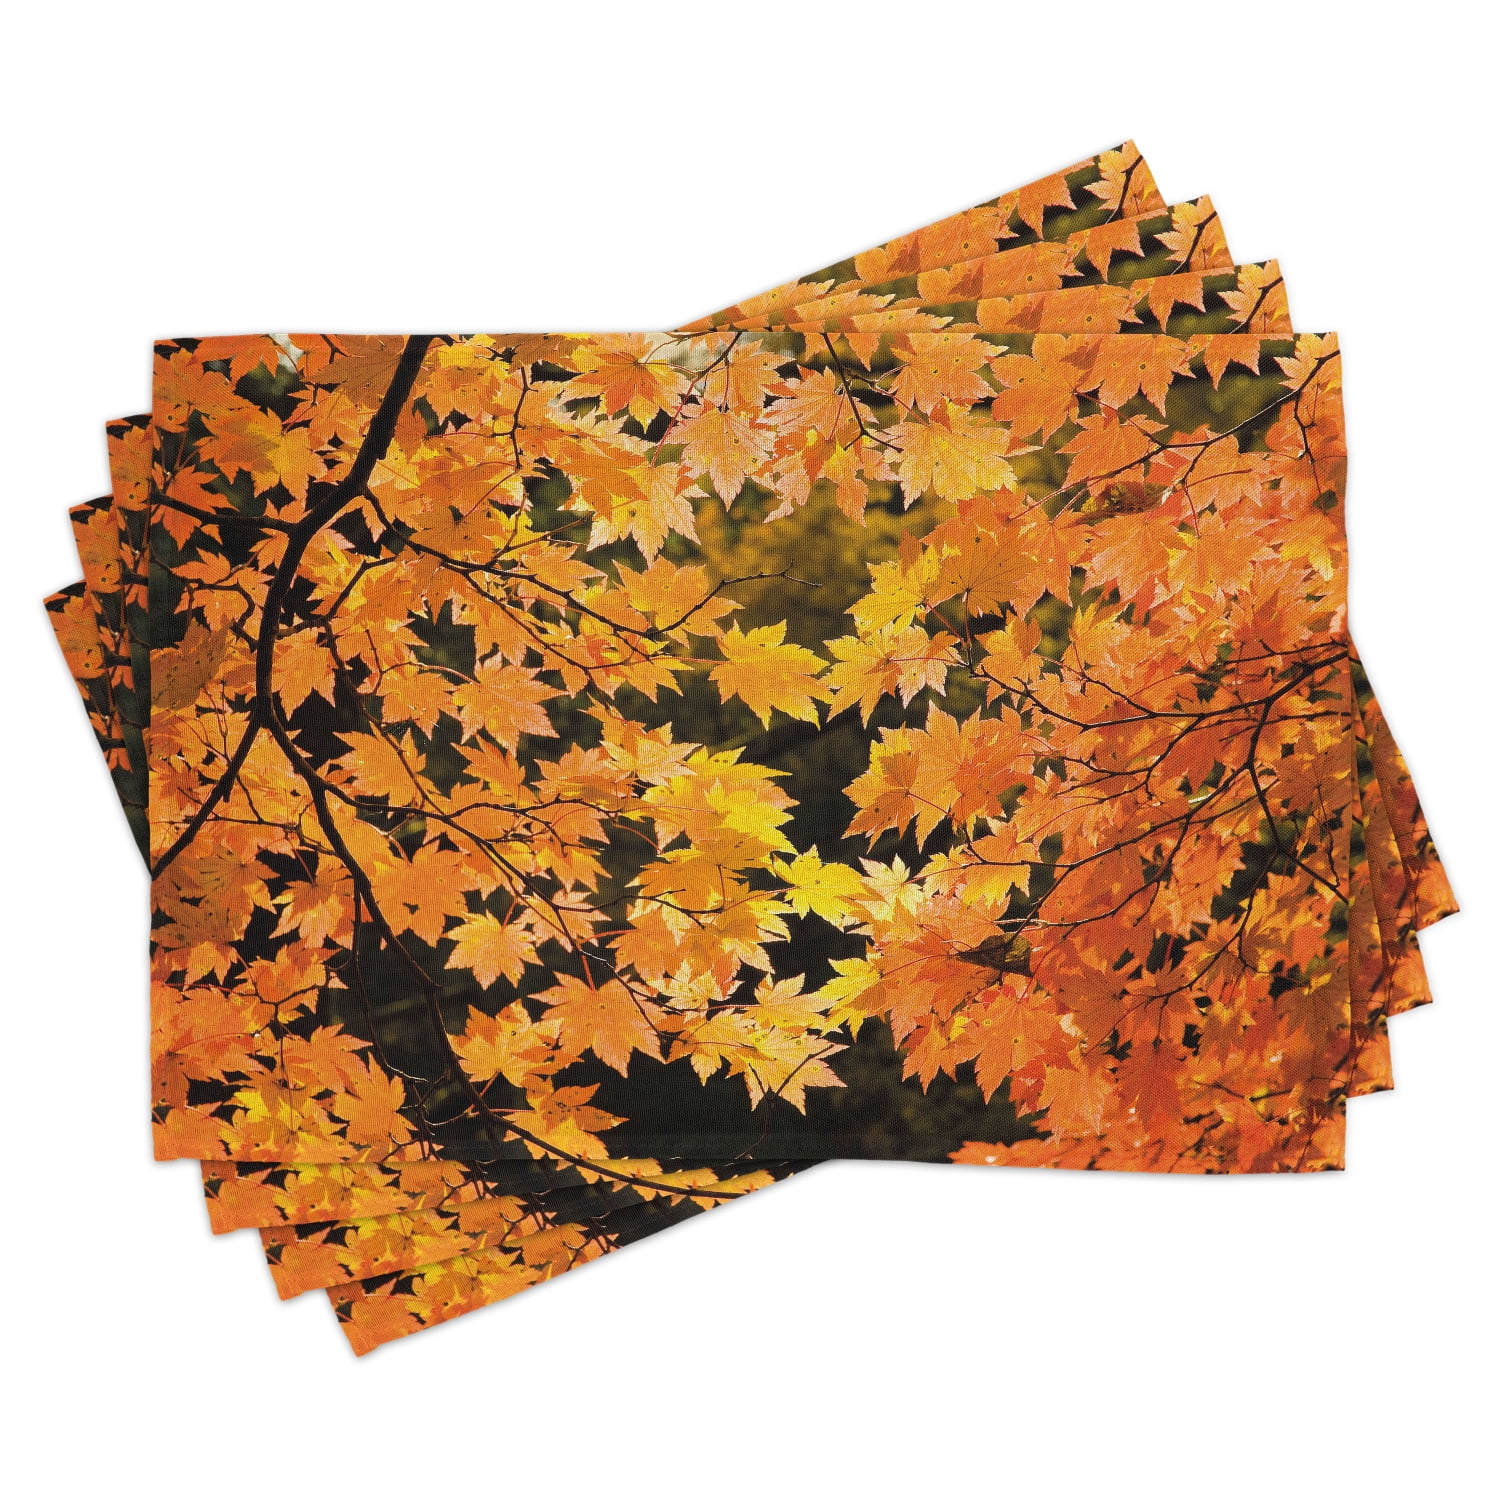 Lot 4 Place Mats Napperon Home Collection Fall Harvest Autumn 13"x18" Place mat 